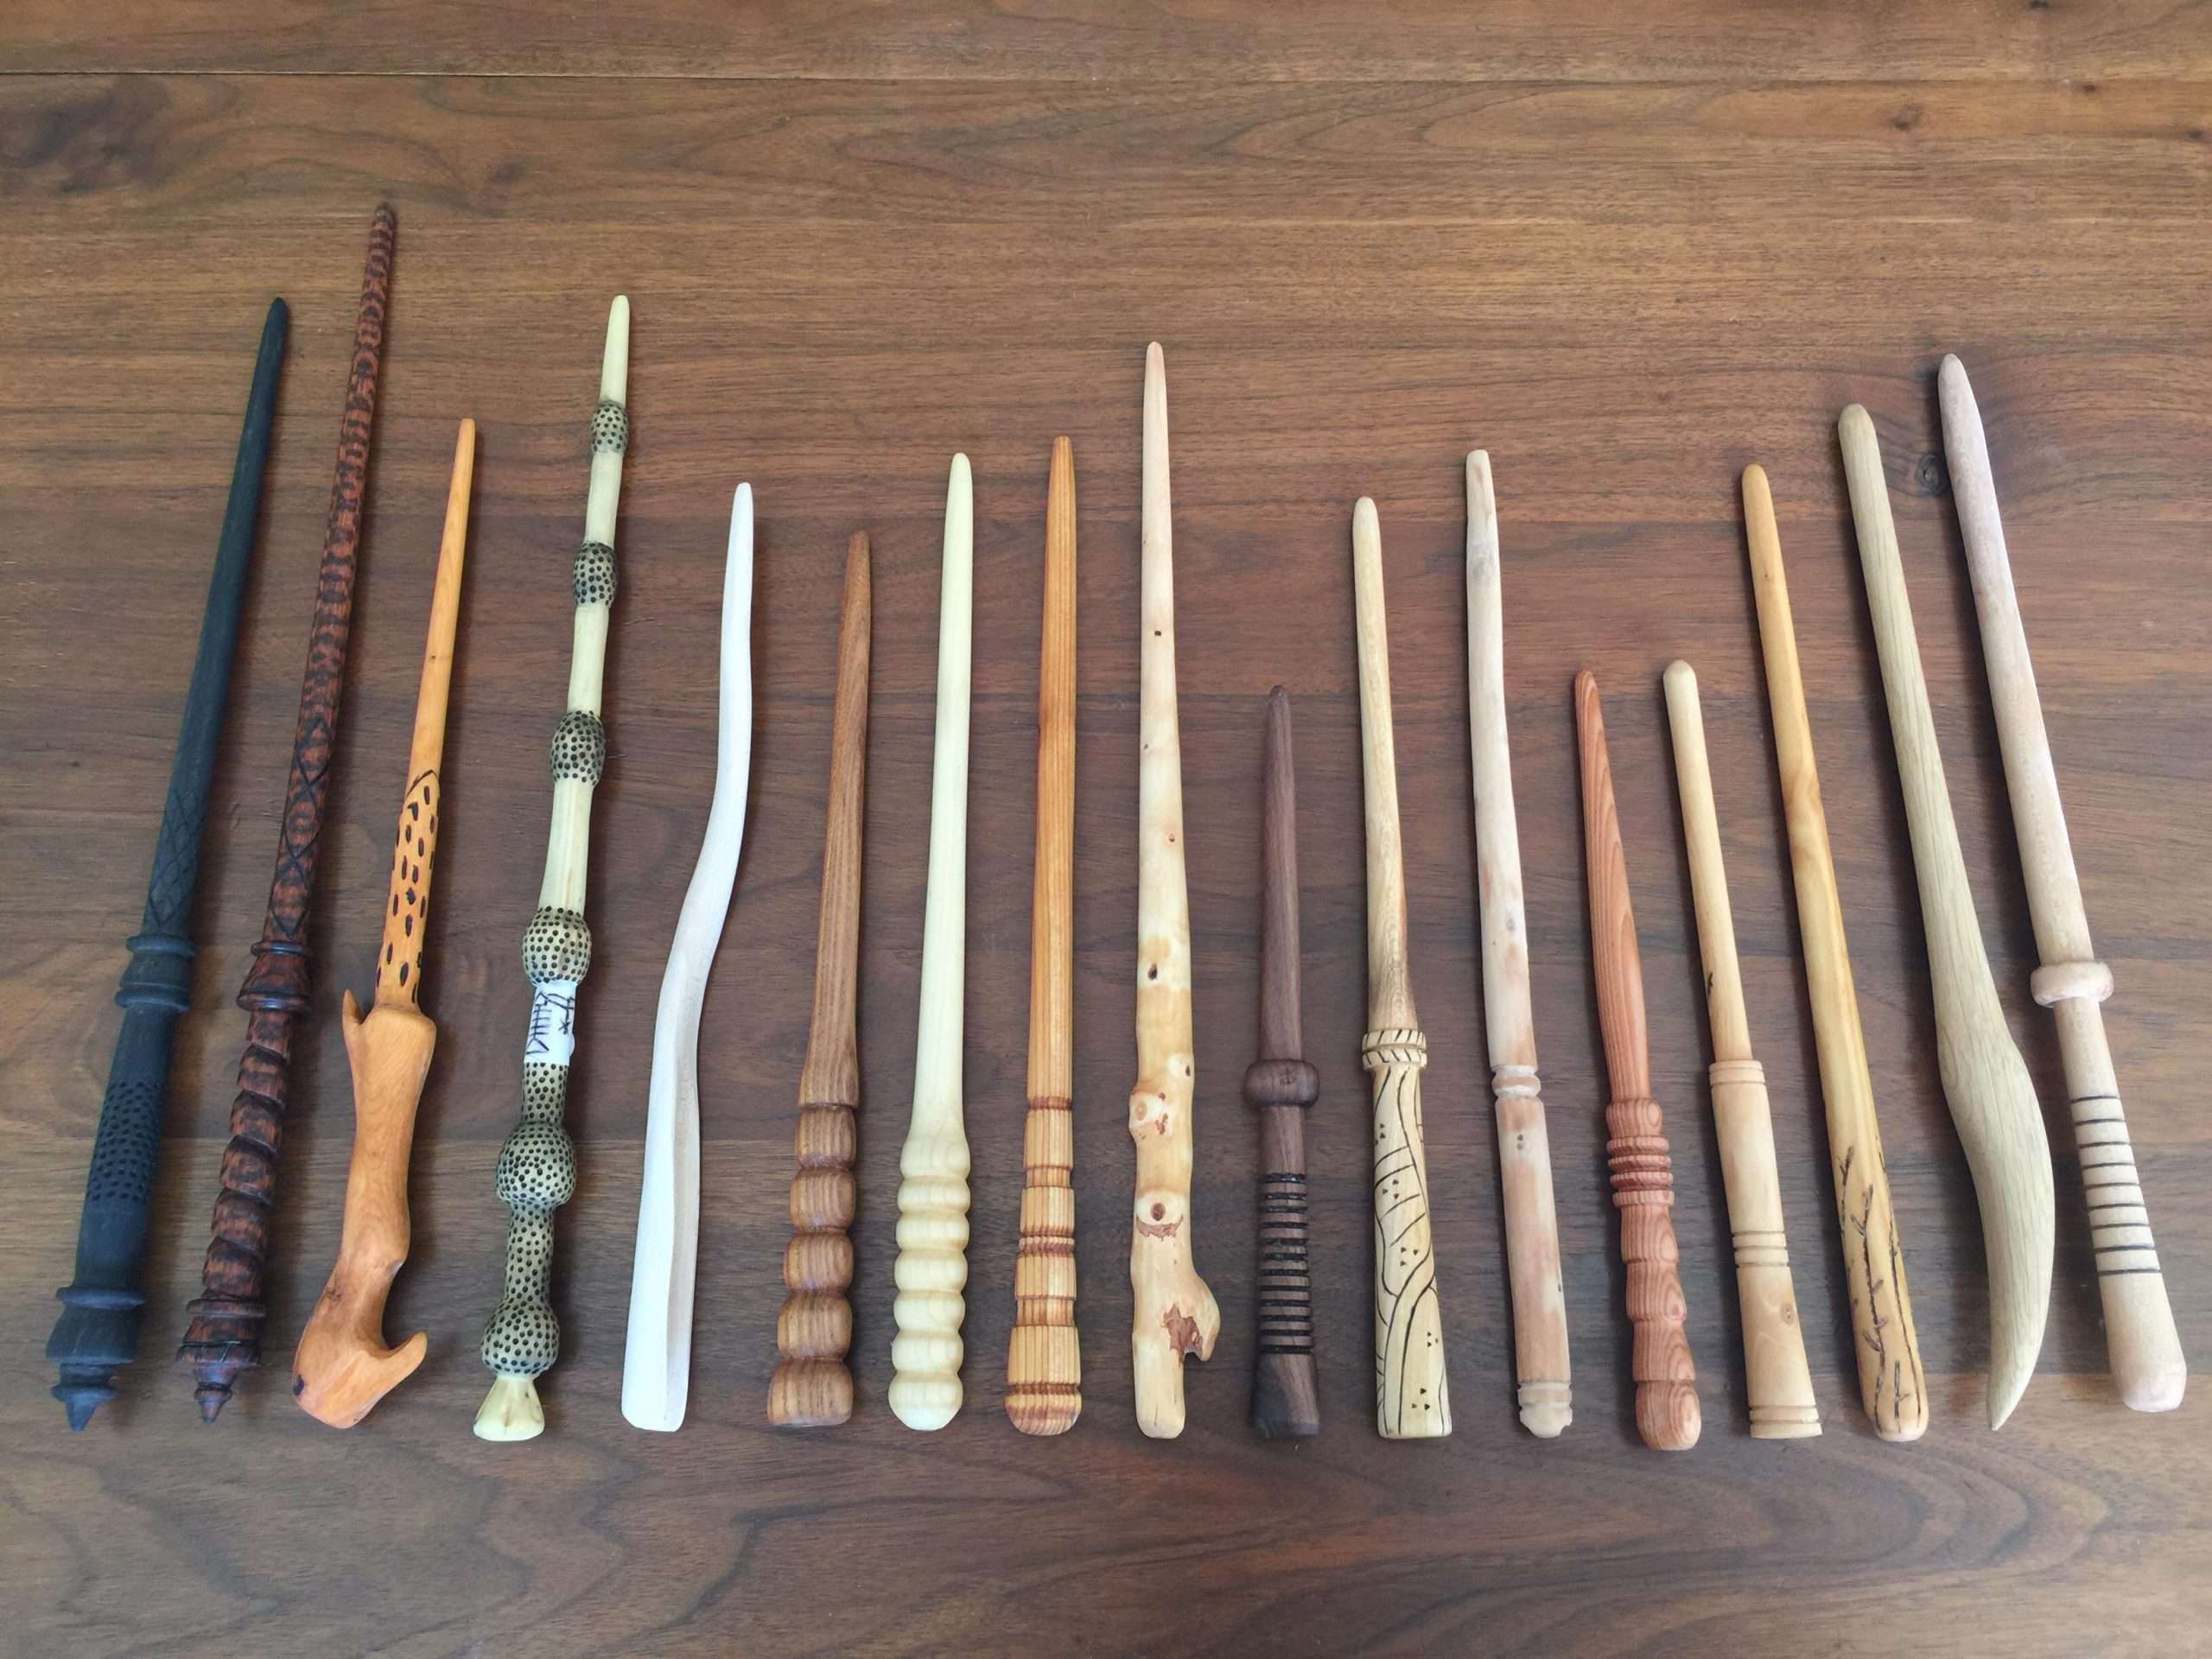 I made 17 Harry Potter wands each made of a different wood ...